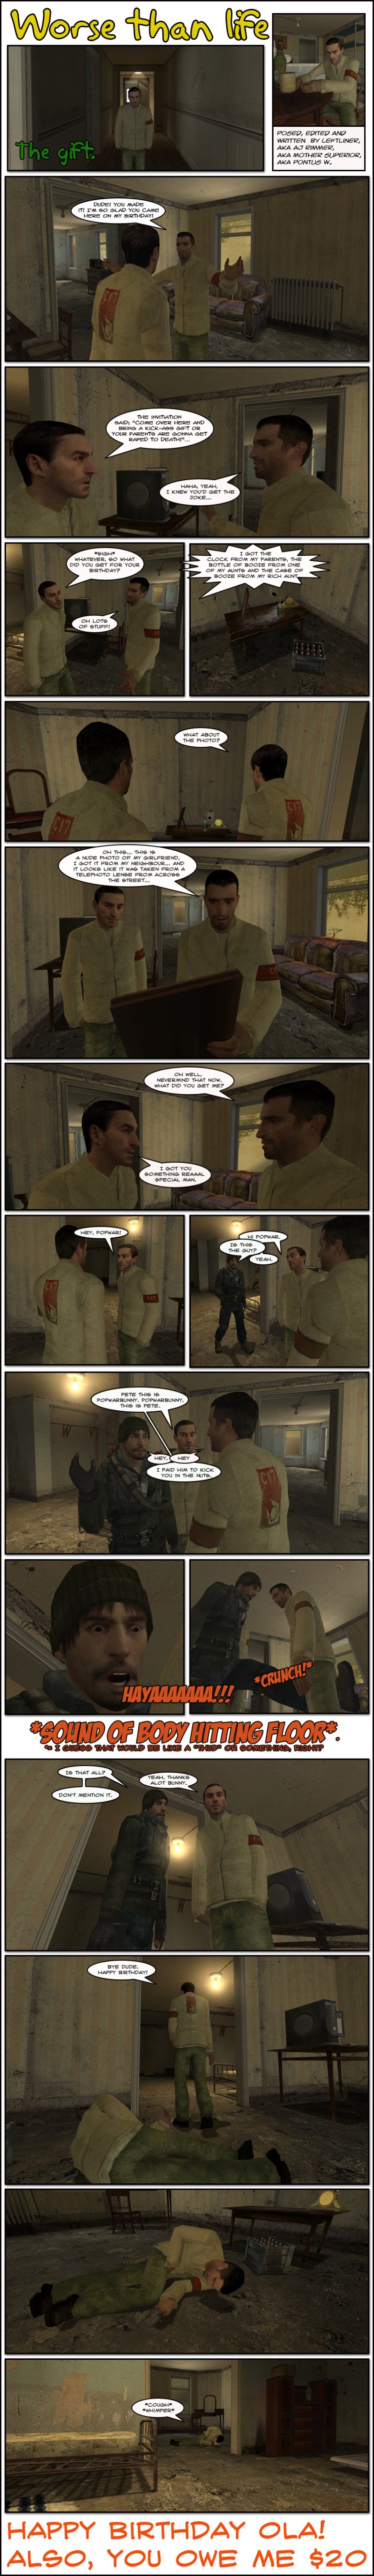 Peter greets AJ Rimmer with open arms, saying he is so glad Rimmer came to his apartment for his birthday. Rimmer states that the invitation said to come over there and bring a kickass gift or his parents are gonna get raped to death, to which Peter laughs and says he knew Rimmer would get the joke. Rimmer shrugs it off and asks Peter what he got for his birthday. Peter replies he got lots of stuff and showcases his gifts: a clock from his parents, a bottle of booze from one of his aunts and a case of booze from his rich aunt. Rimmer asks about a photo frame there and Peter tells him it's a nude photo of his girlfriend, which he got from his neighbor and it looks like it was taken with a telephoto lens from across the street. Peter tells Rimmer never mind and asks what he got him. Rimmer smiles and tells Peter he got him something special, then calls over PopwarBunny. Popwar enters and asks if that is the guy, to which Rimmer replies yes. Rimmer introduces PopwarBunny and Peter to each other and then says he paid Popwar to kick Peter in the nuts. Popwar screams maniacally and kicks Peter in the groin, making a crunching sound. Peter falls on the floor and Popwar asks if that is all. Rimmer says yes and thanks him, to which PopwarBunny replies don't mention it. Rimmer leaves telling Peter, who lies on the ground holding his stomach, happy birthday. Peter coughs and whimpers. The end.